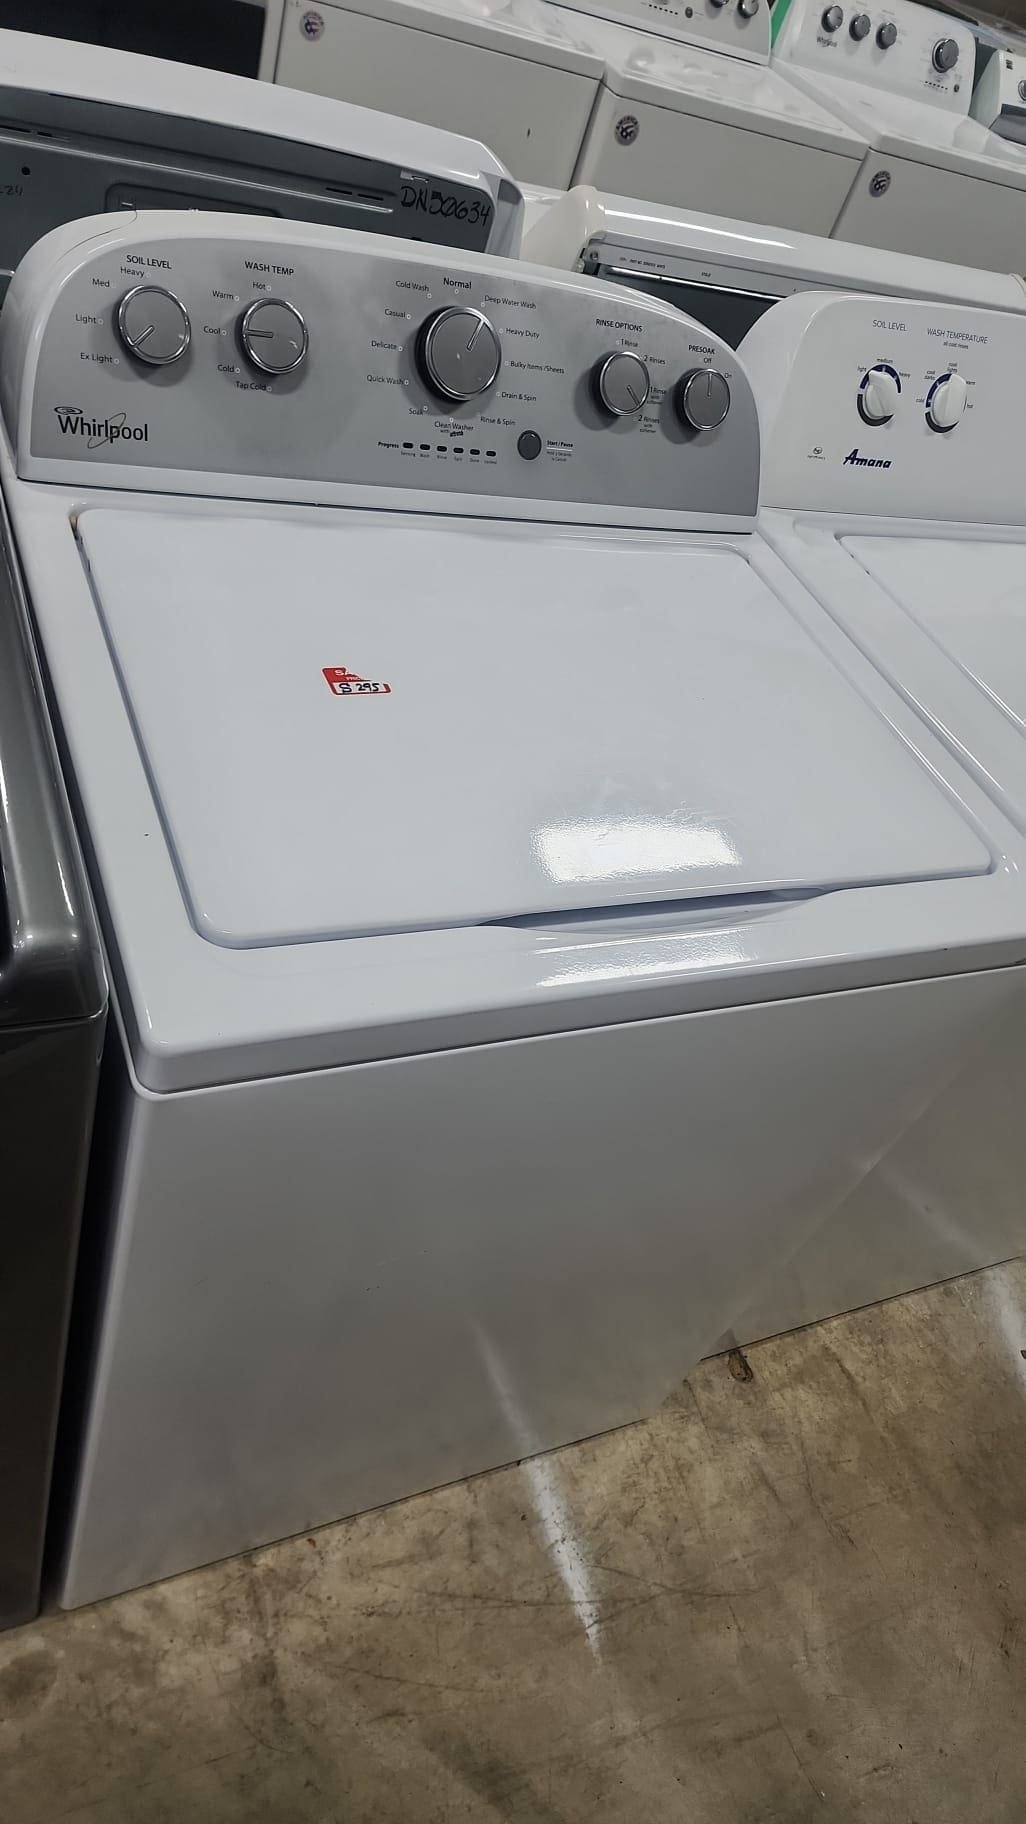 Whirlpool Used Top Load Washer – White